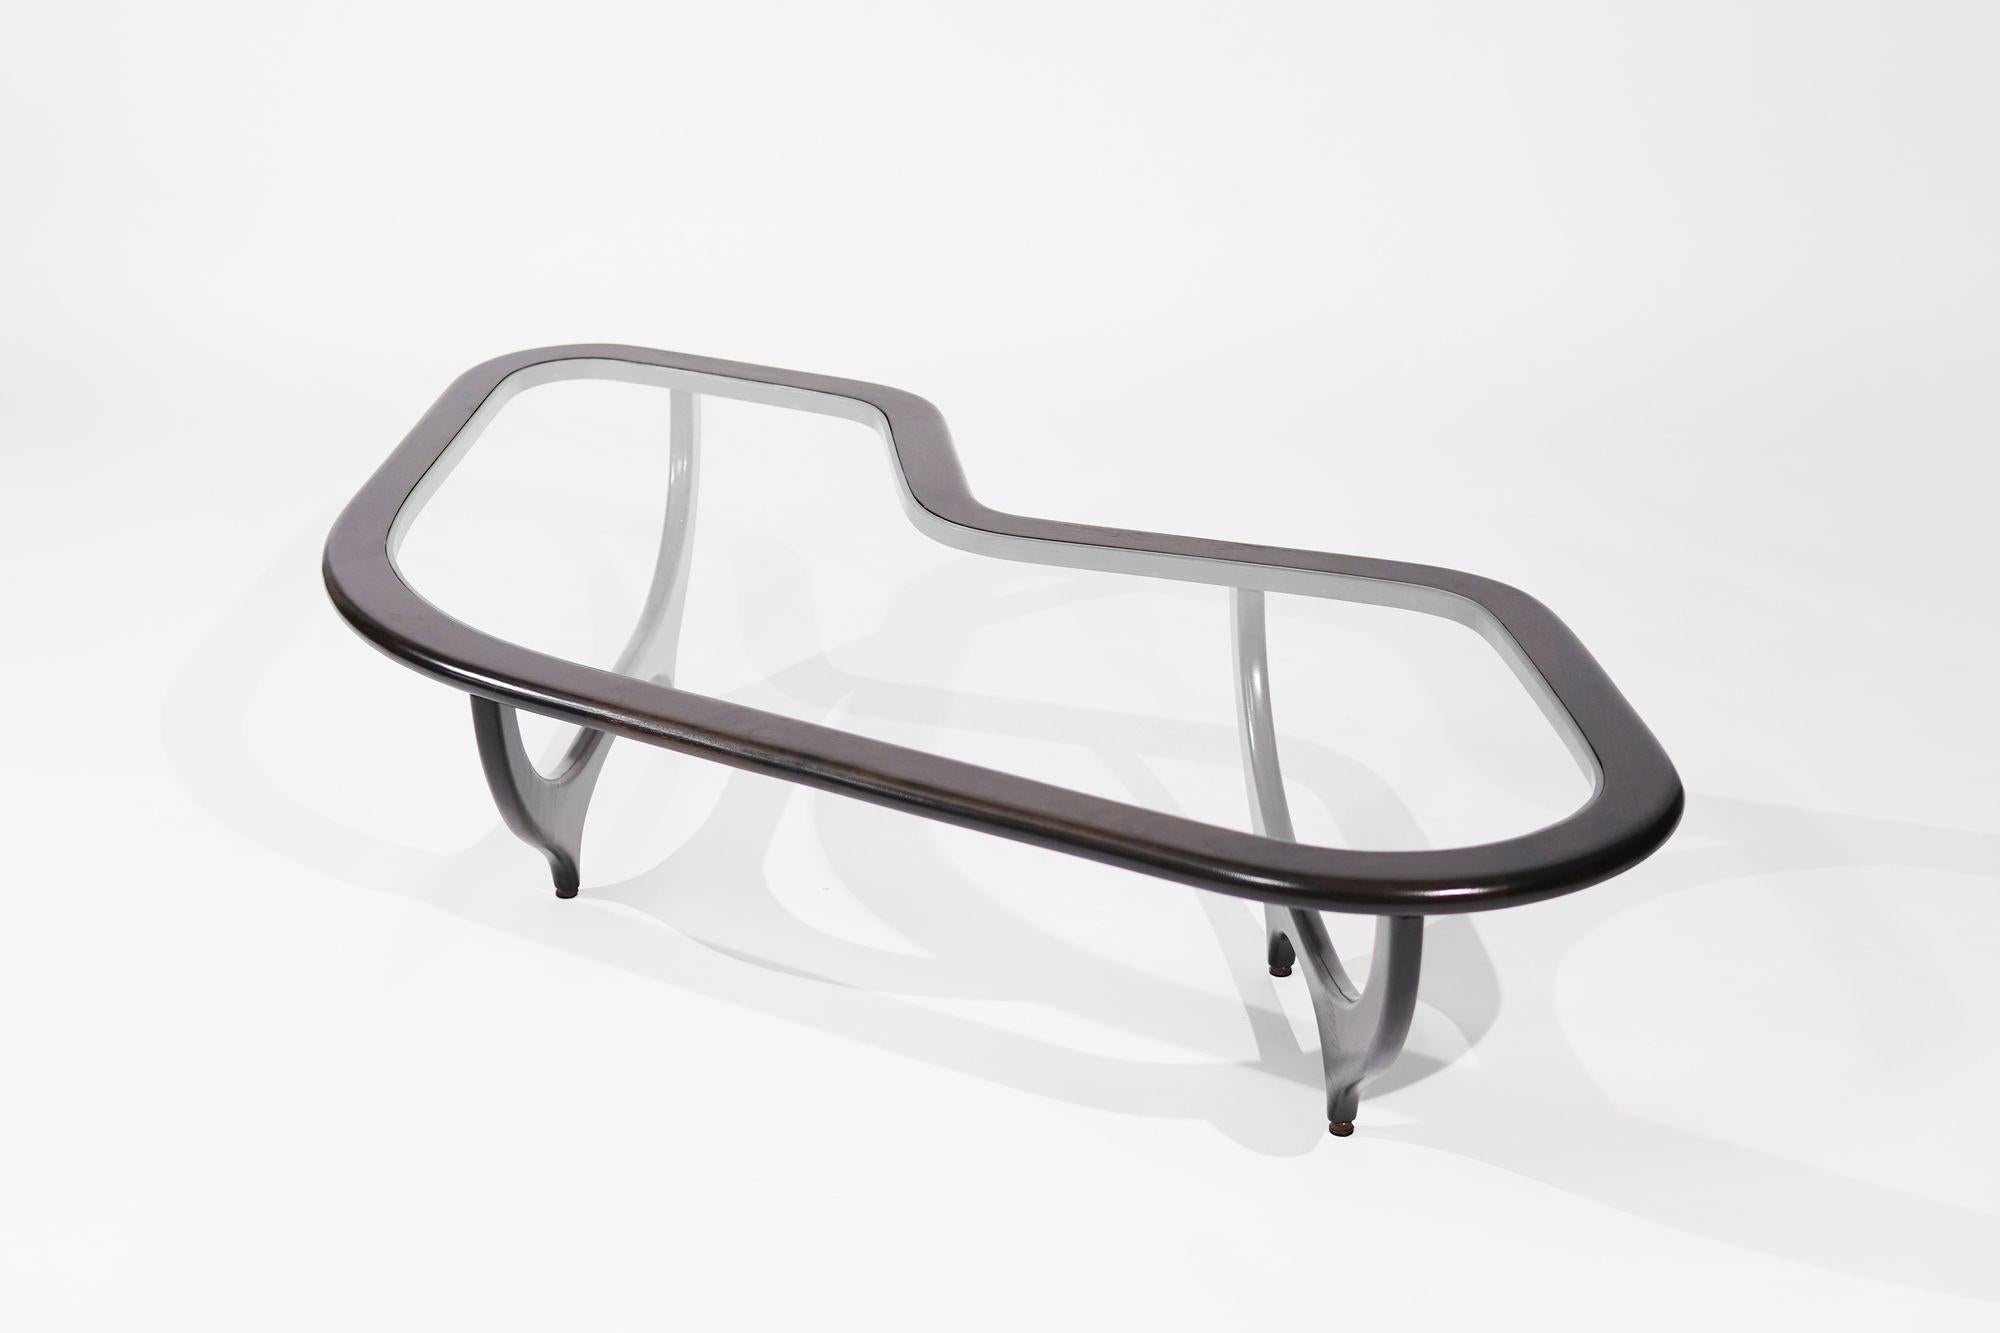 Walnut Contour Coffee Table in Espresso by Stamford Modern For Sale